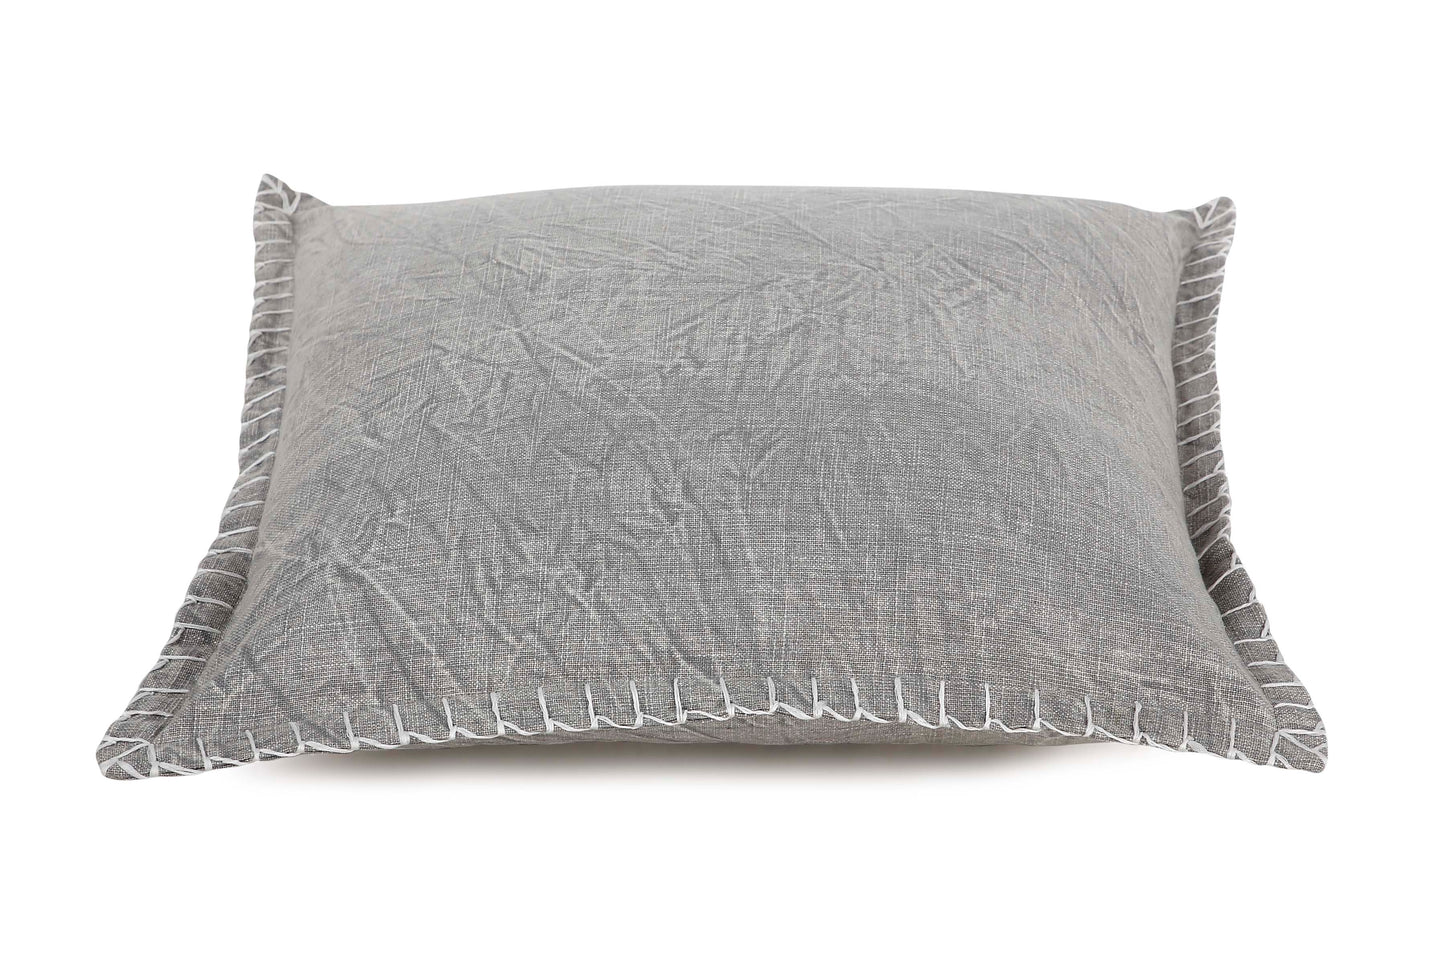 Stone Washed Throw Pillow, Grey - 21x21 Inch by The Artisen